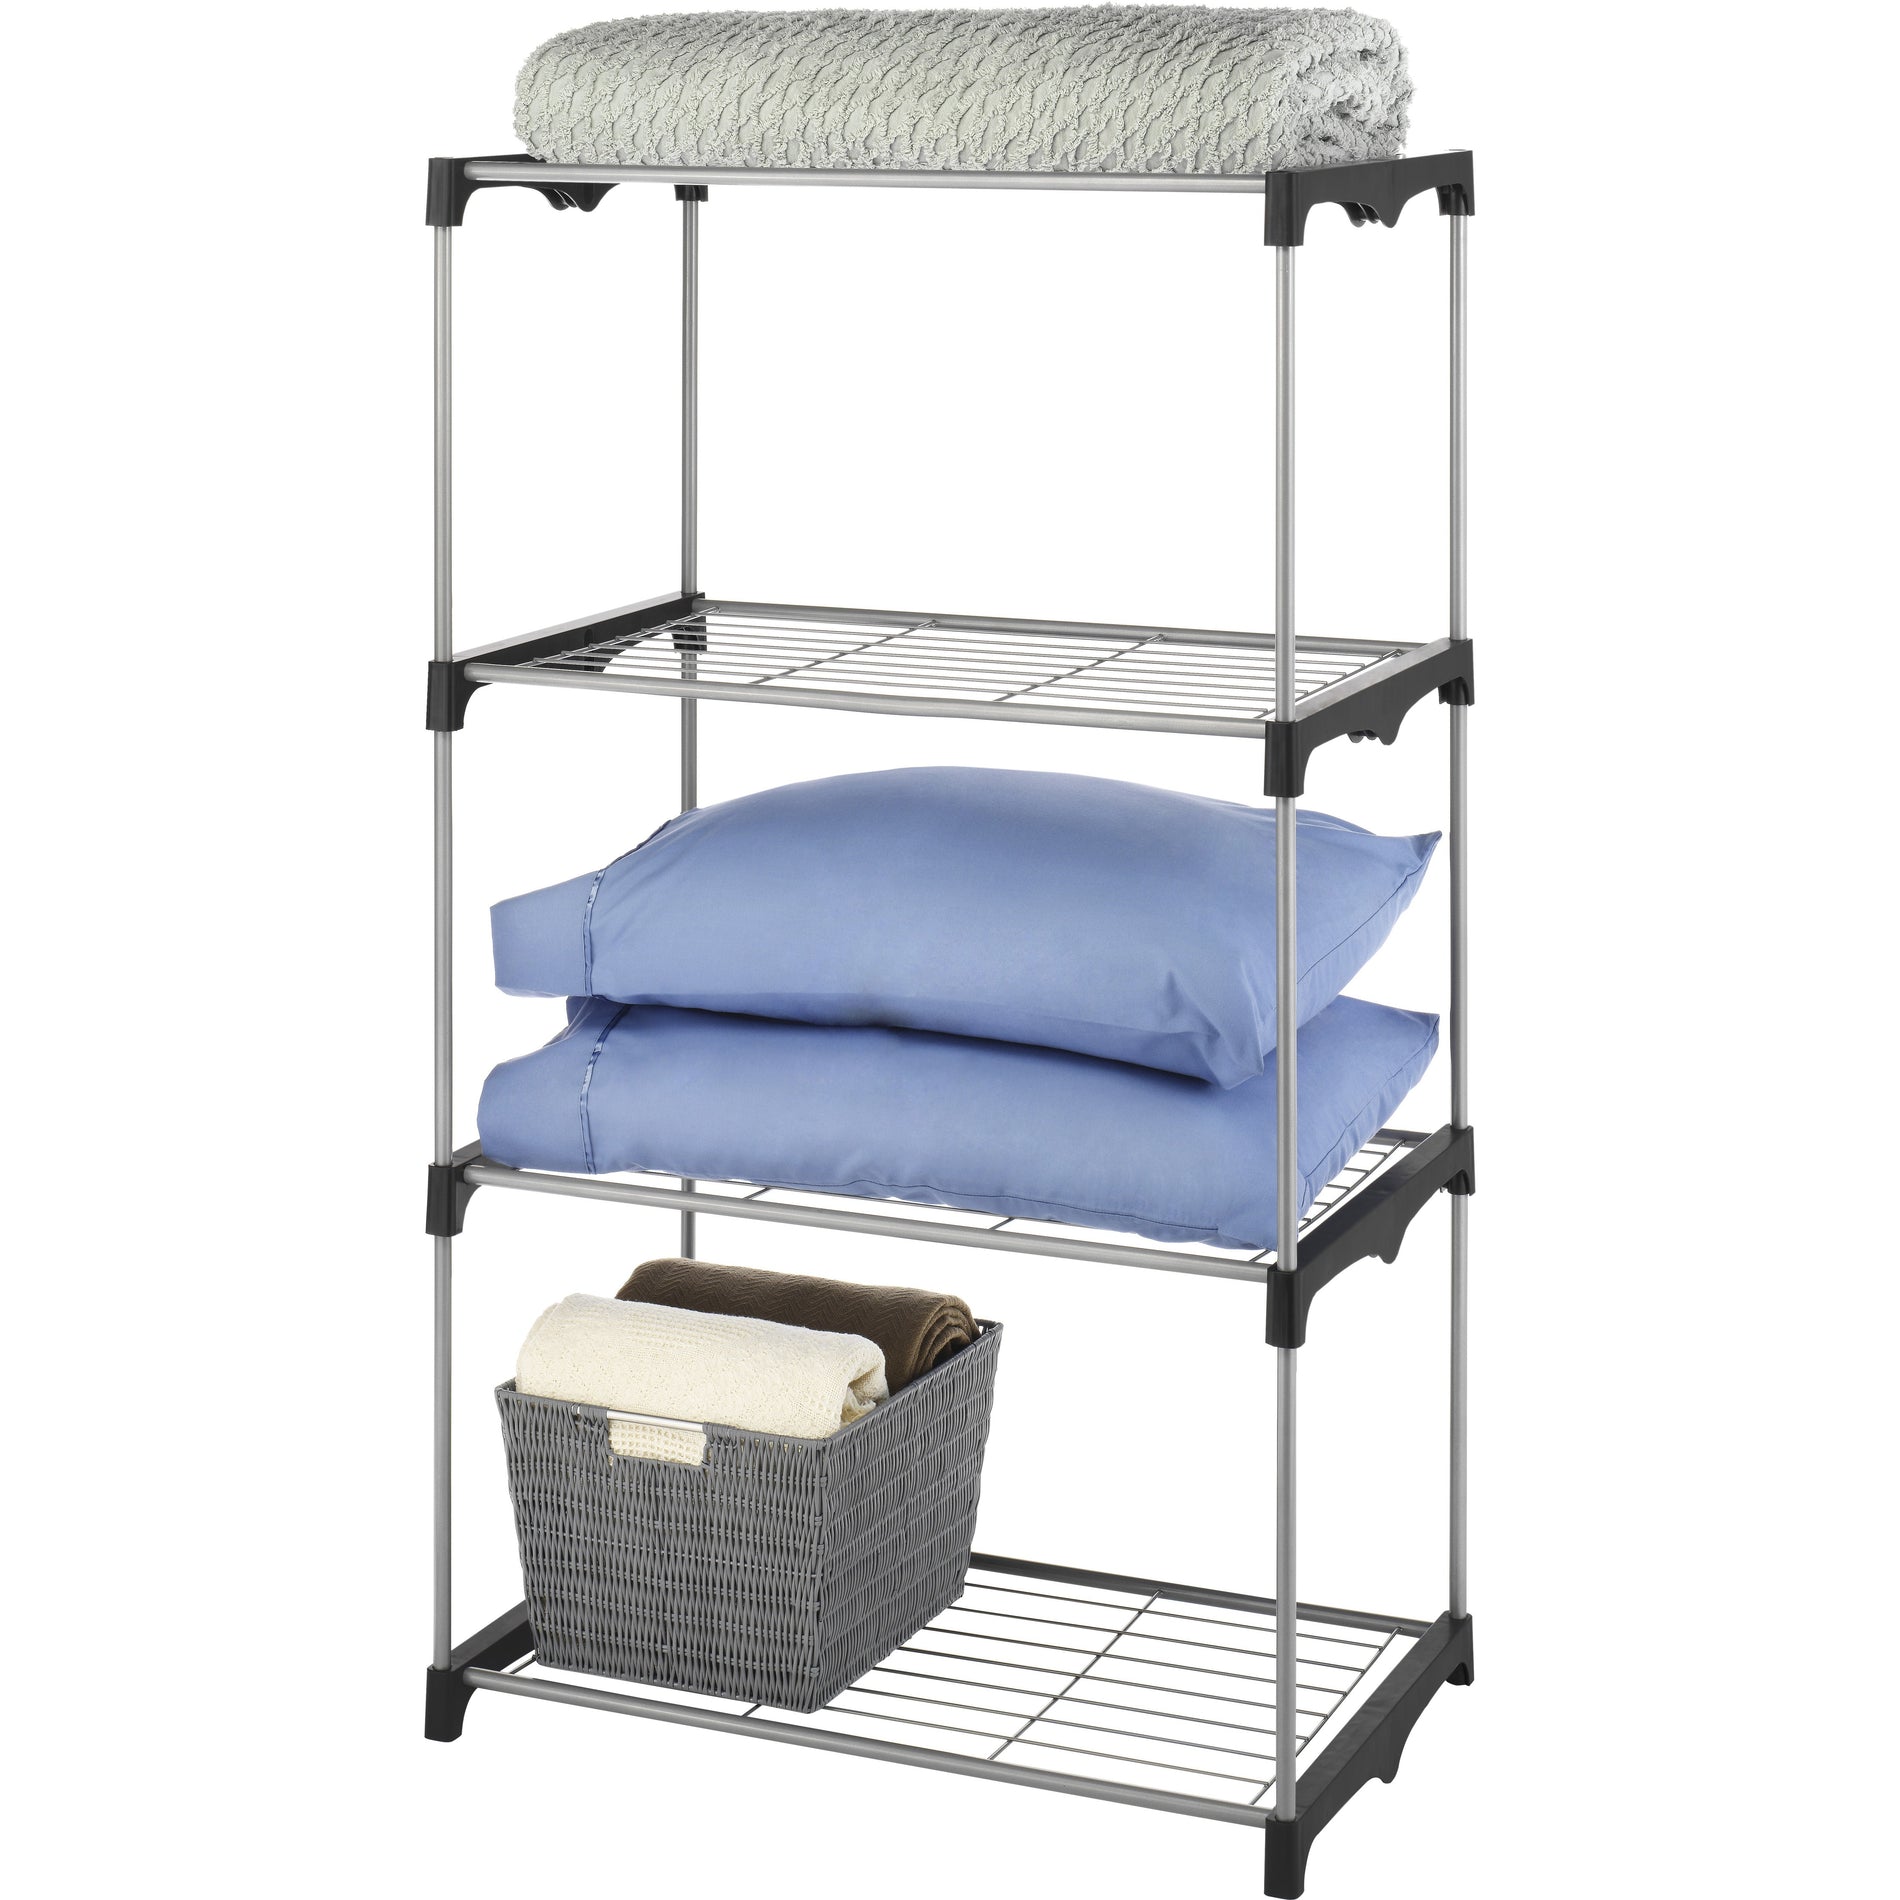 Whitmor 6779-4414 Storage Rack, Heavy Duty, Sturdy, 4 Tiers, Silver, Metal and Resin